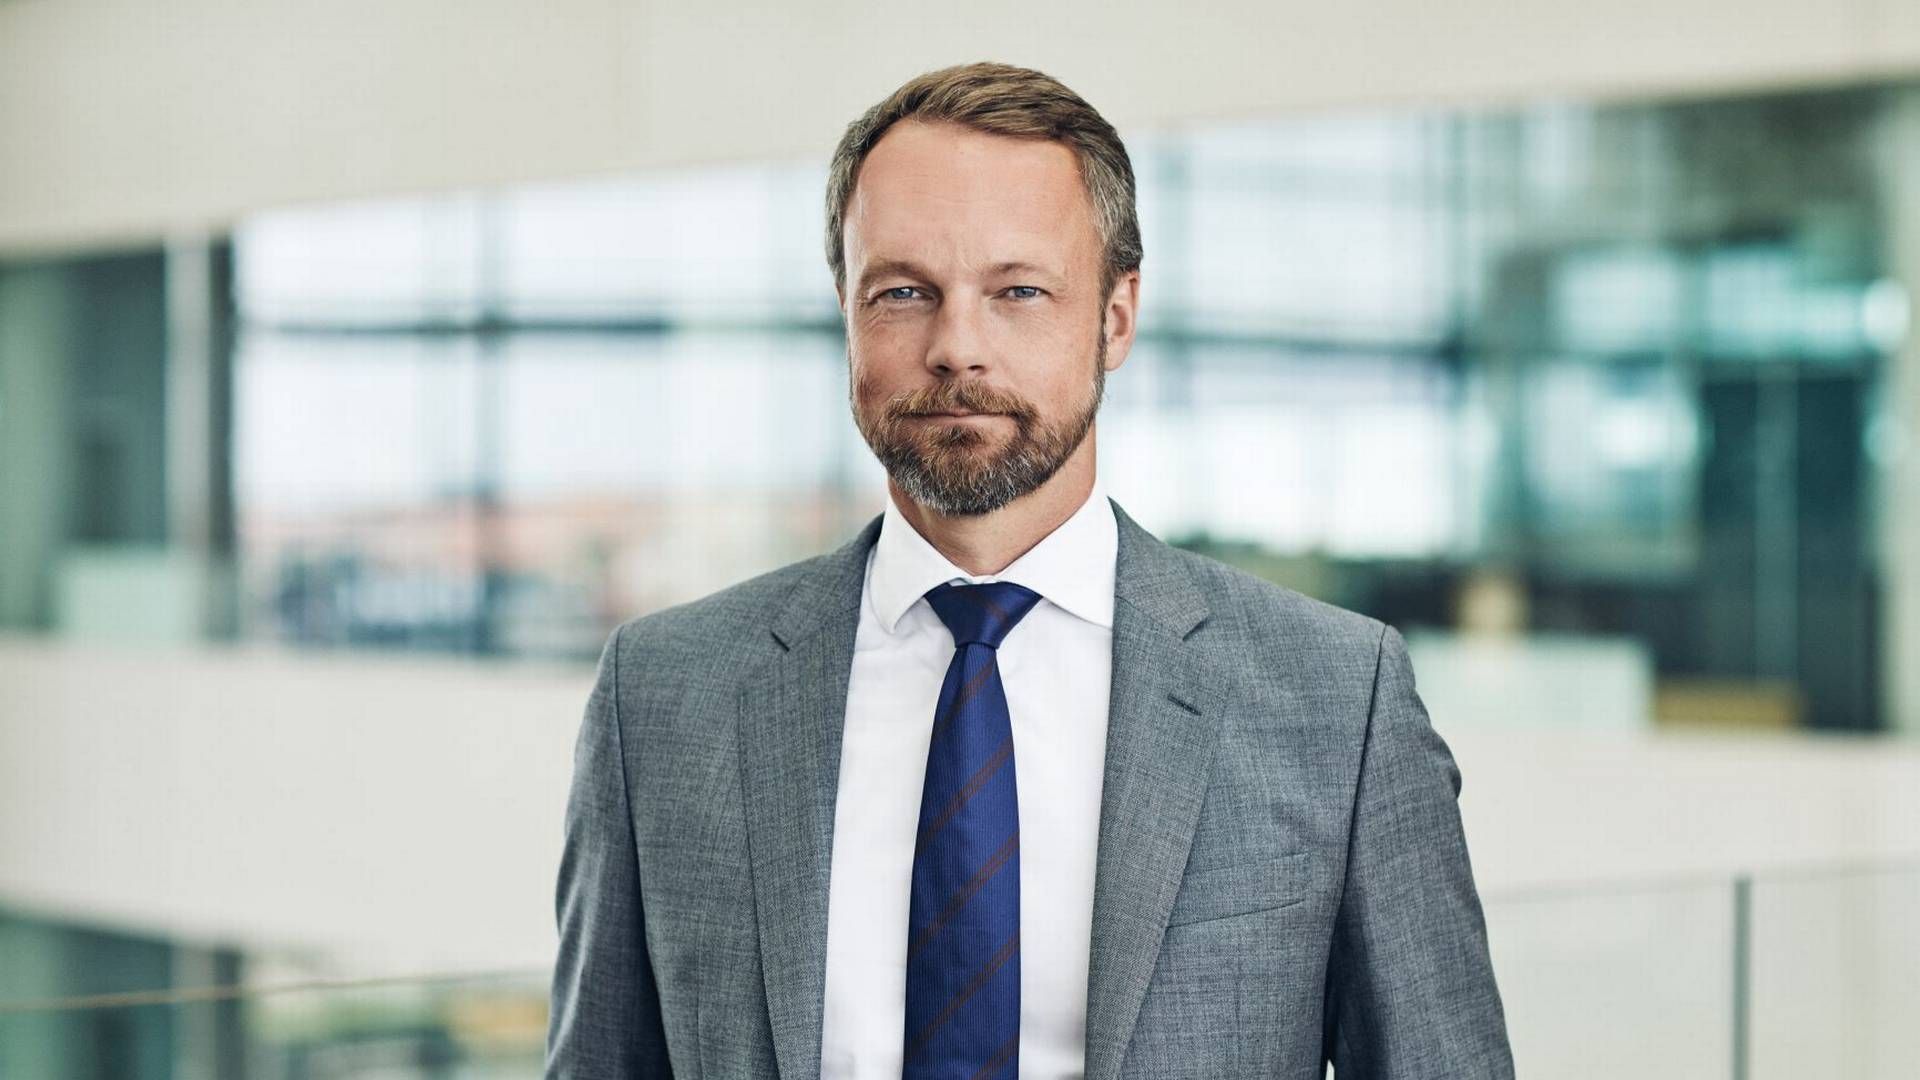 Peter Kjærgaard has spent more than 10 years at Nykredit, but is now leading the firm Formuepleje. | Photo: Pr/nykredit